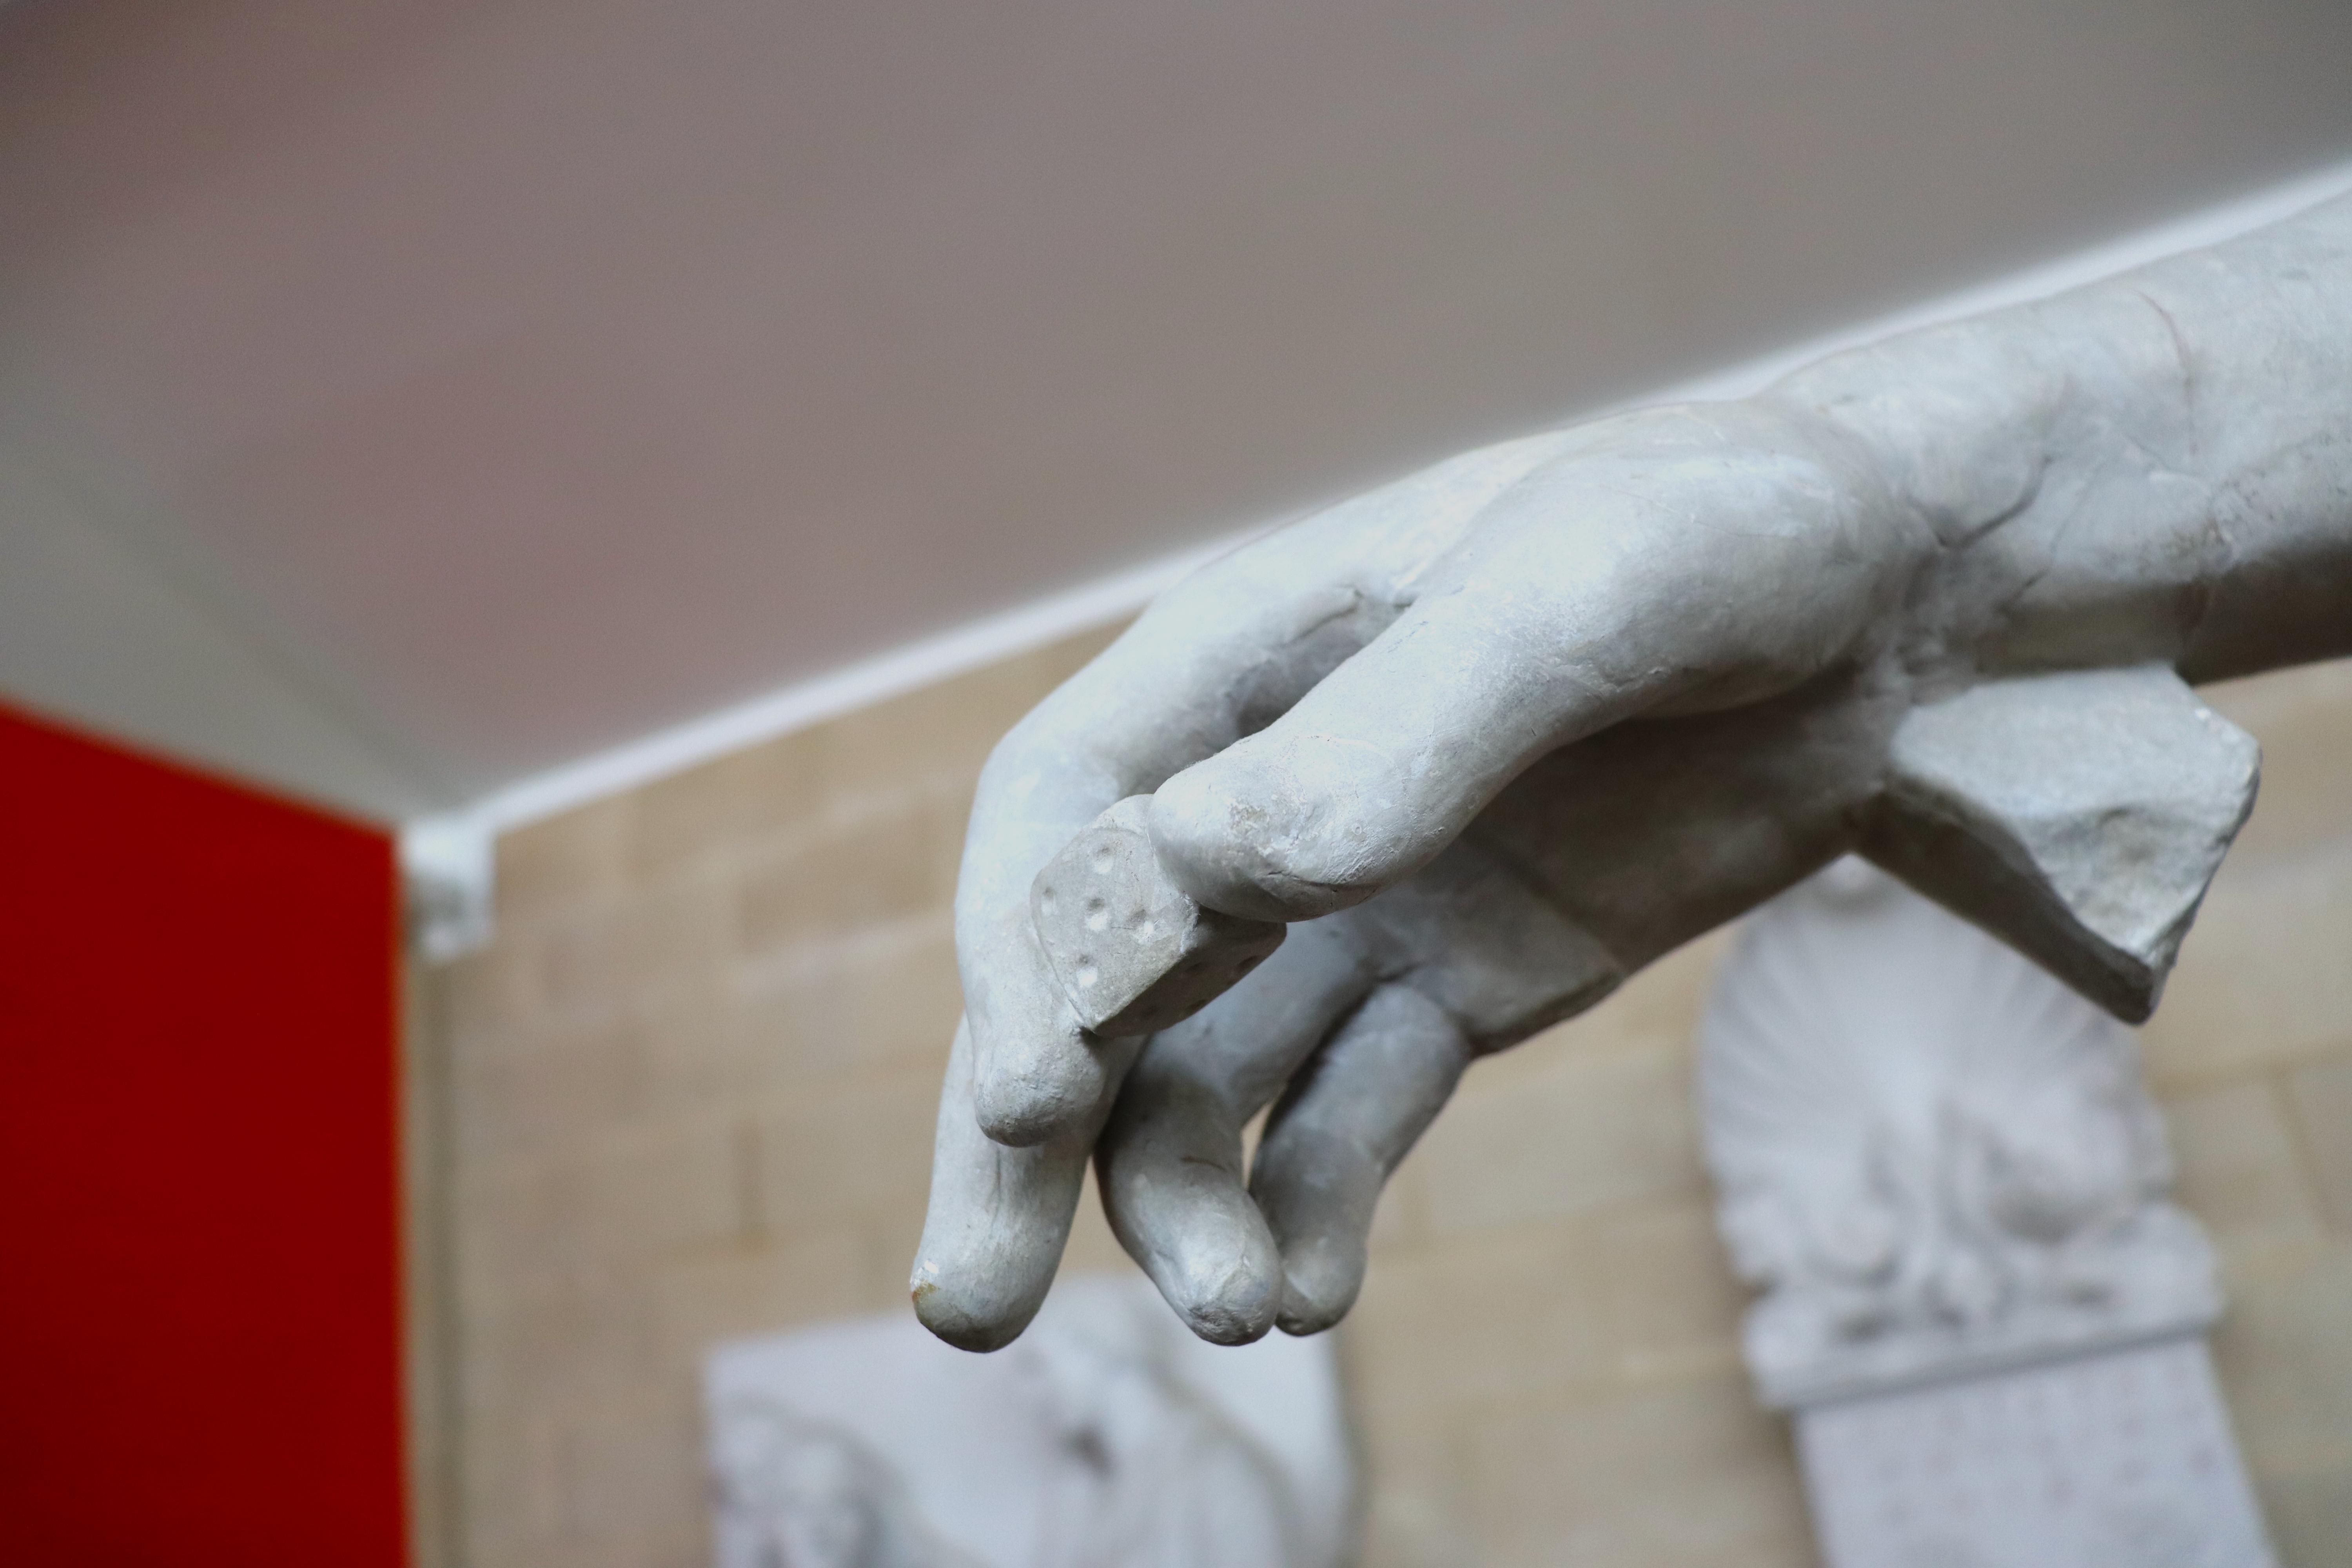 Hand of a statue holding a die.